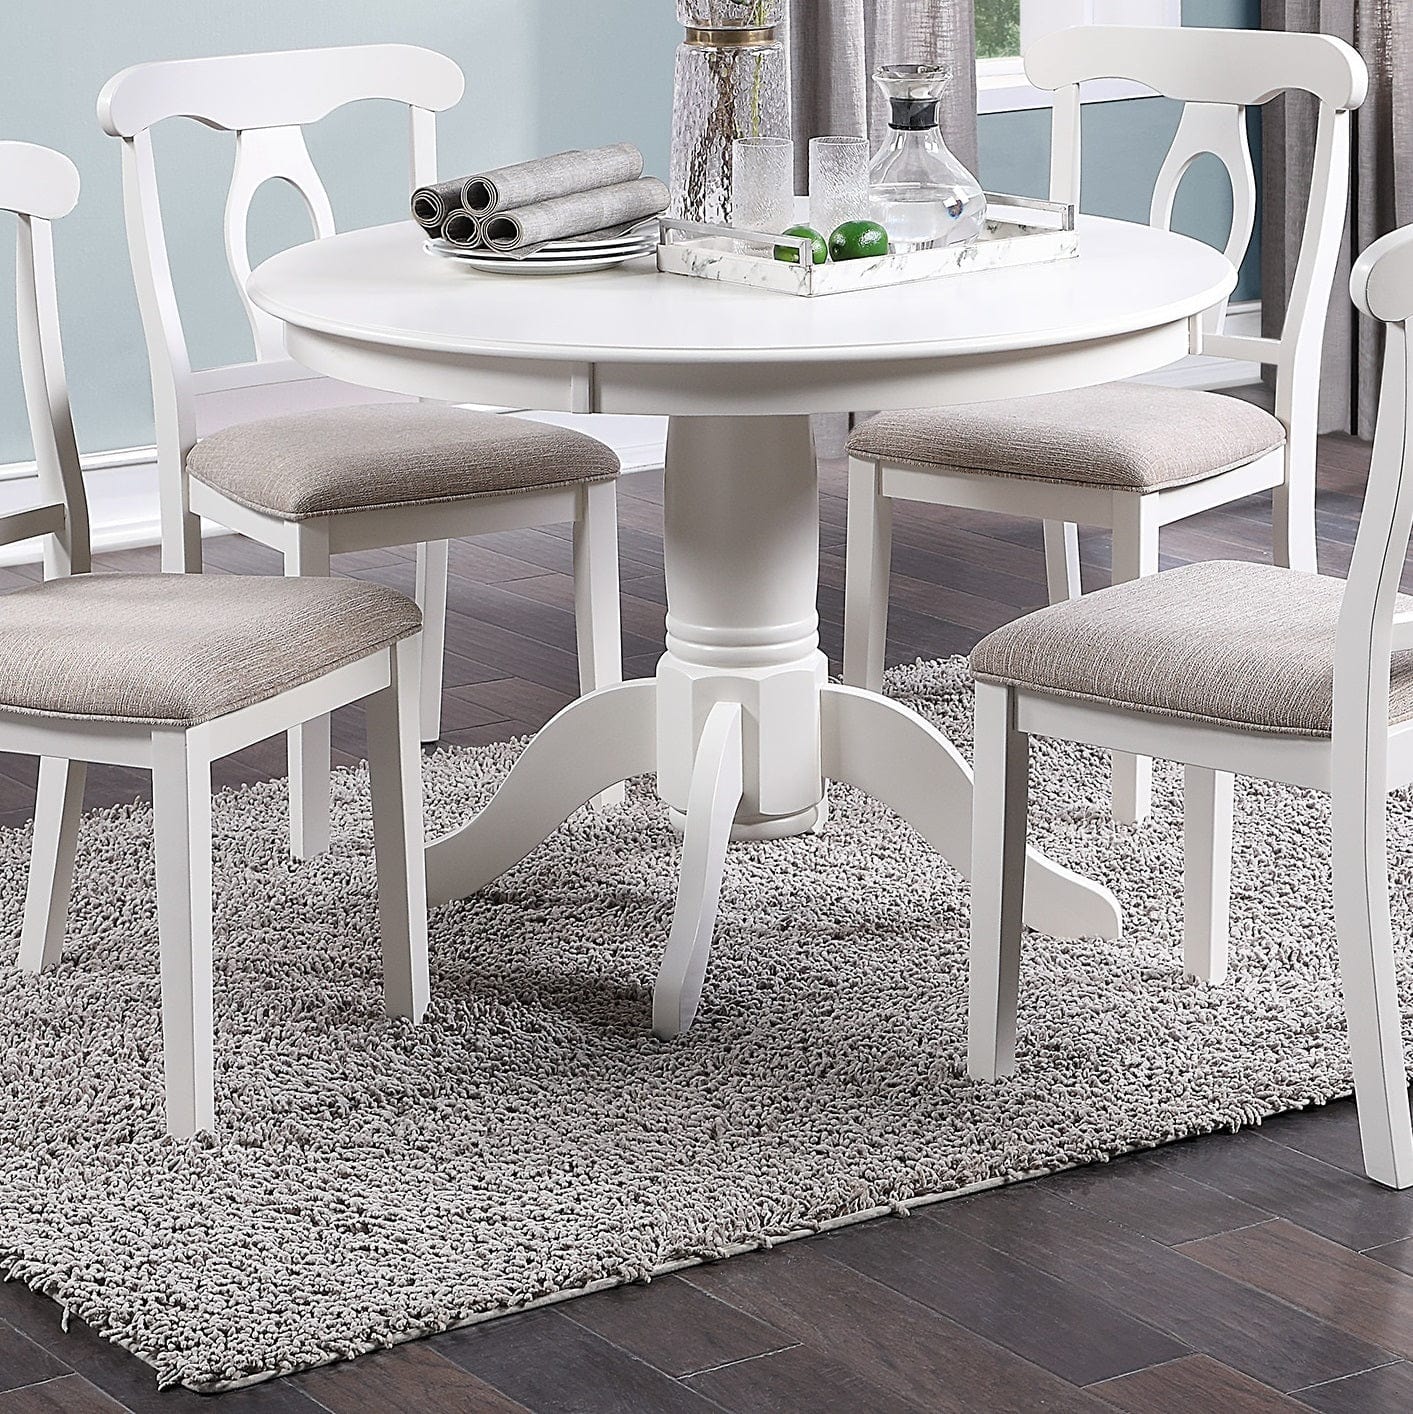 1st Choice Furniture Direct Dining Set 1st Choice Classic 5-Piece Dining Set - Elegant White Round Table & Chairs